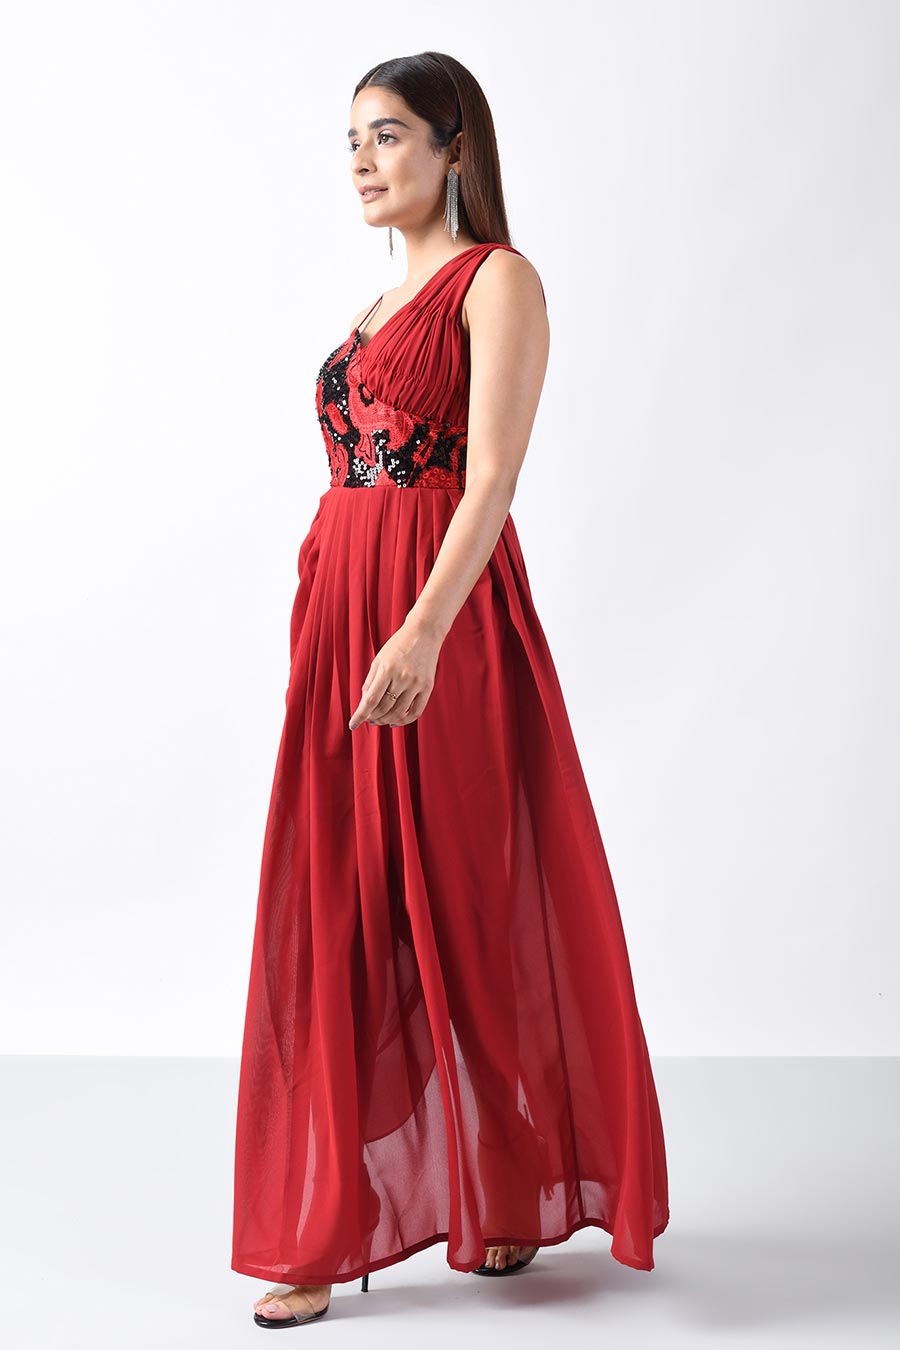 Paola Embroidered Red Drape Dress